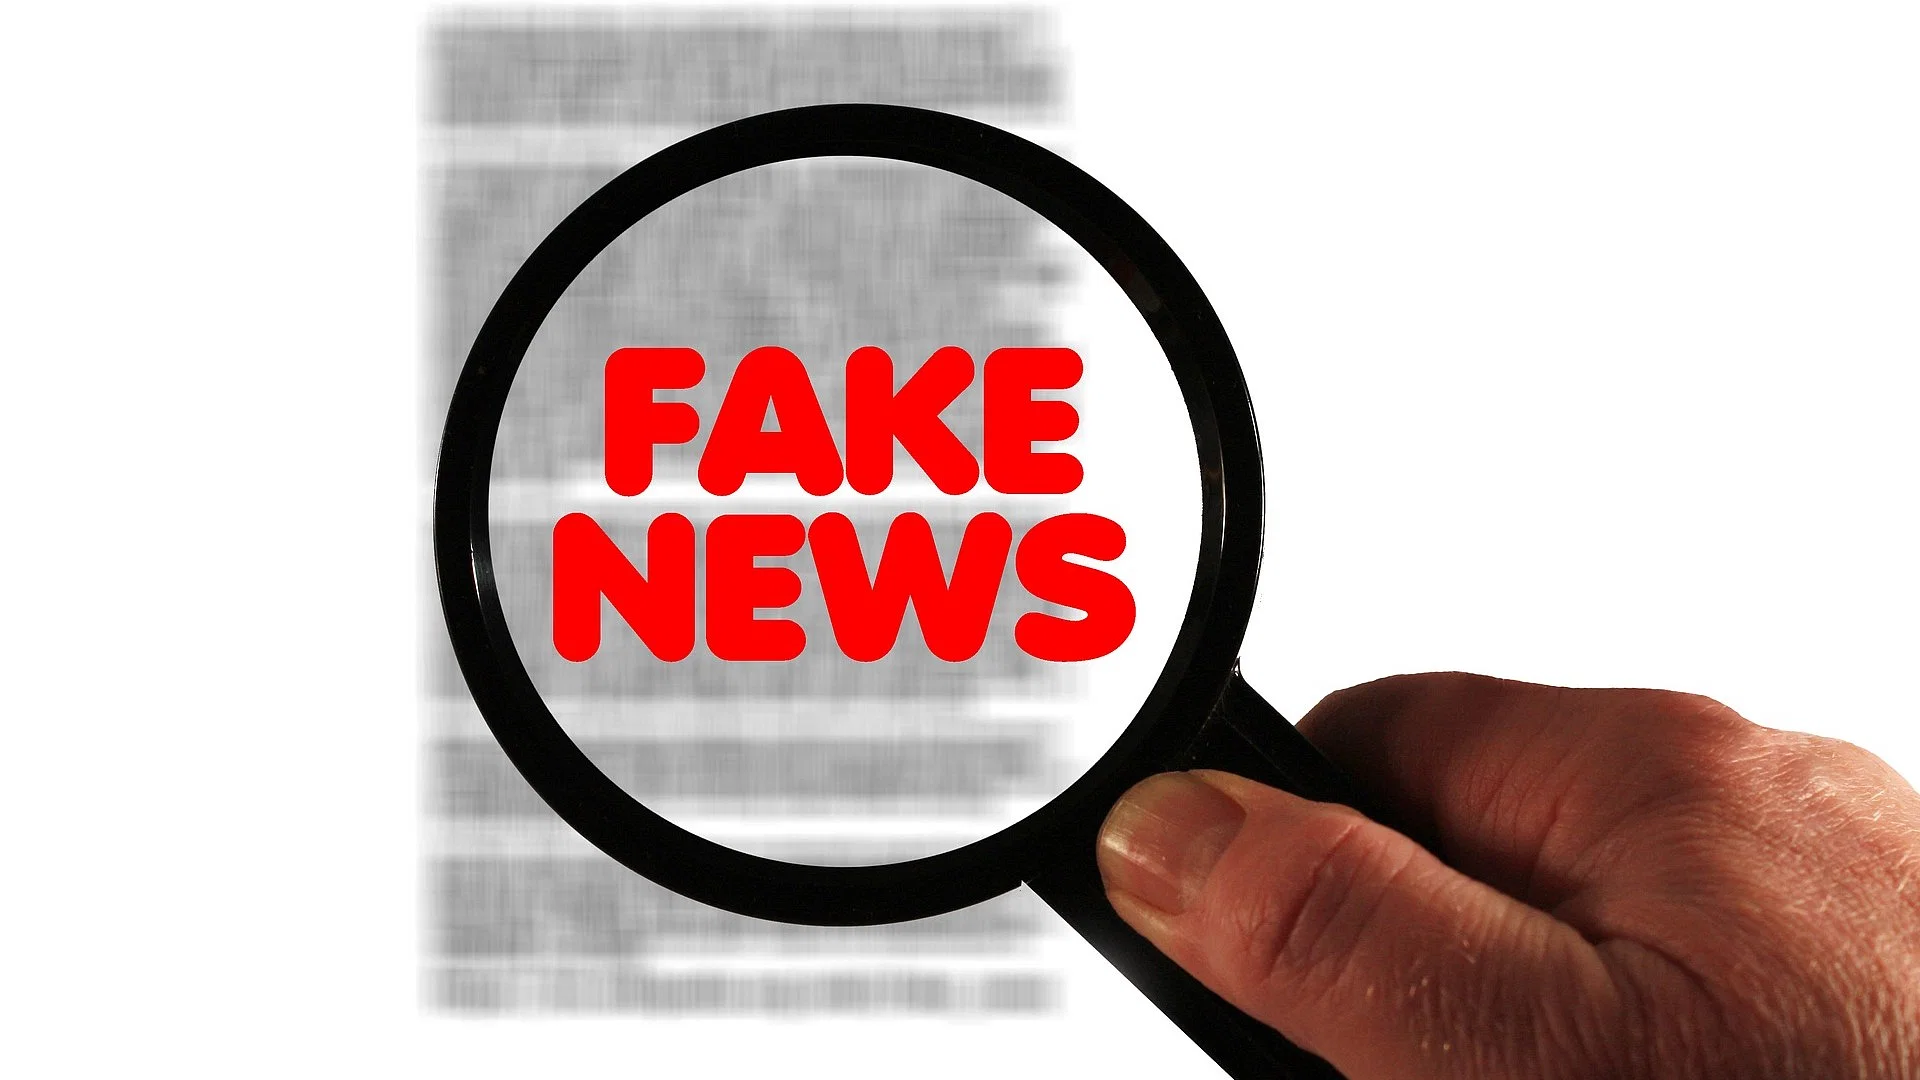 Misinformation, disinformation, false news and trial by social media